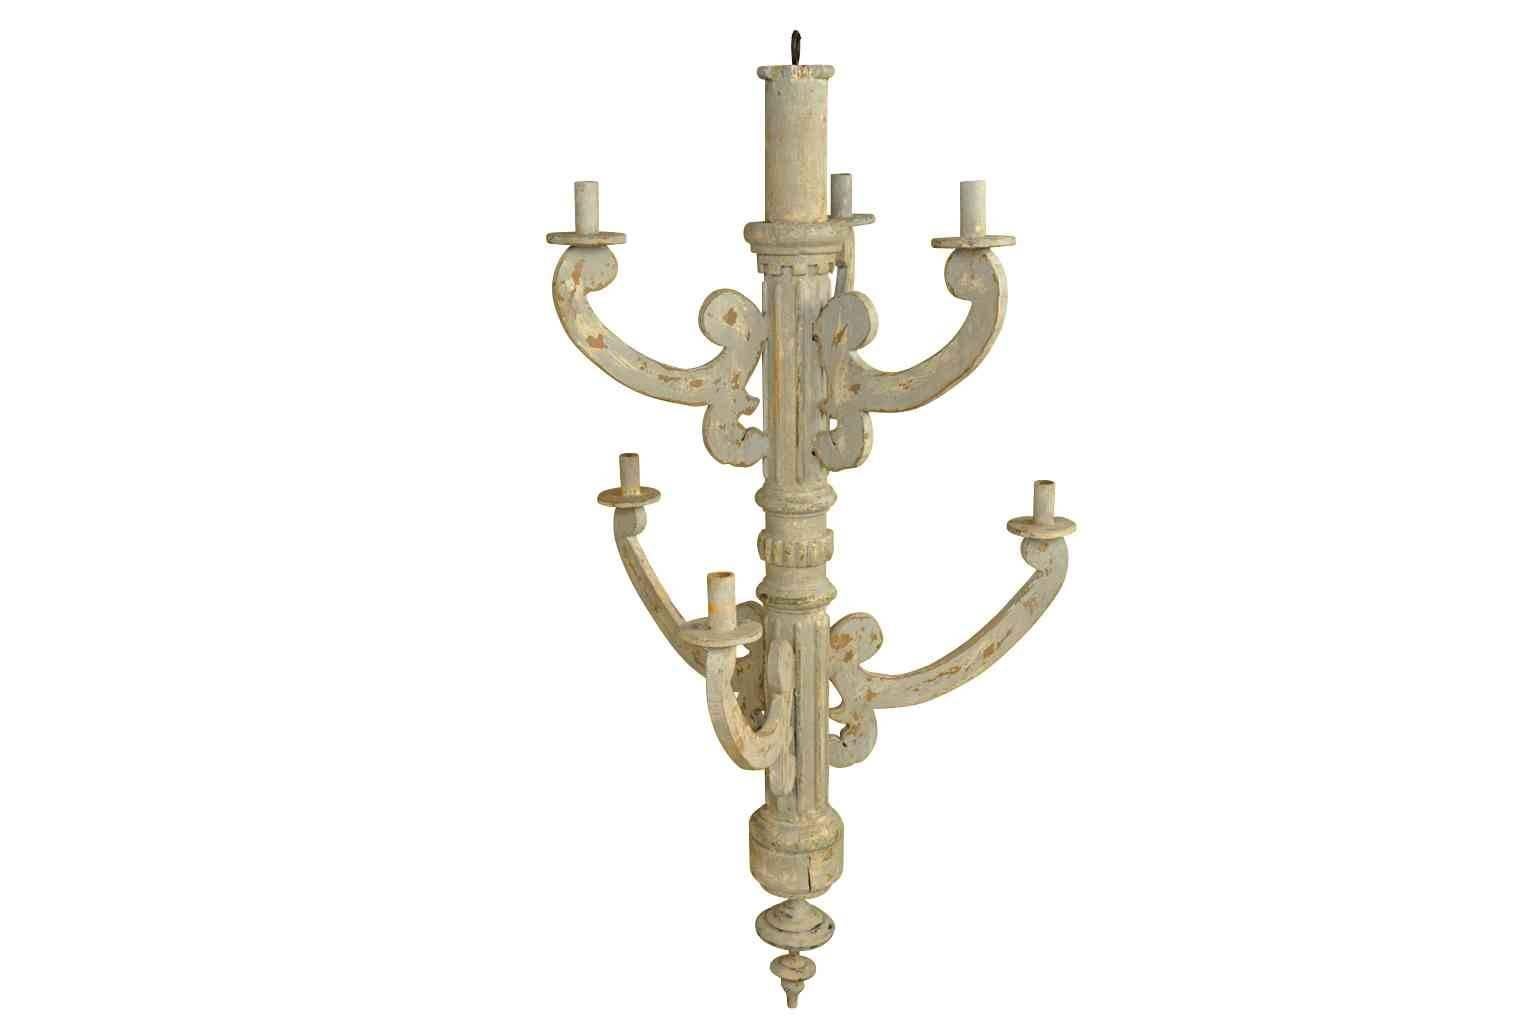 A very attractive pair of Spanish chandeliers in painted wood.  These terrific pieces are constructed from 18th century elements and have a wonderful painted finish in soft tones of grey with a hint of blue.  The chandeliers may be sold